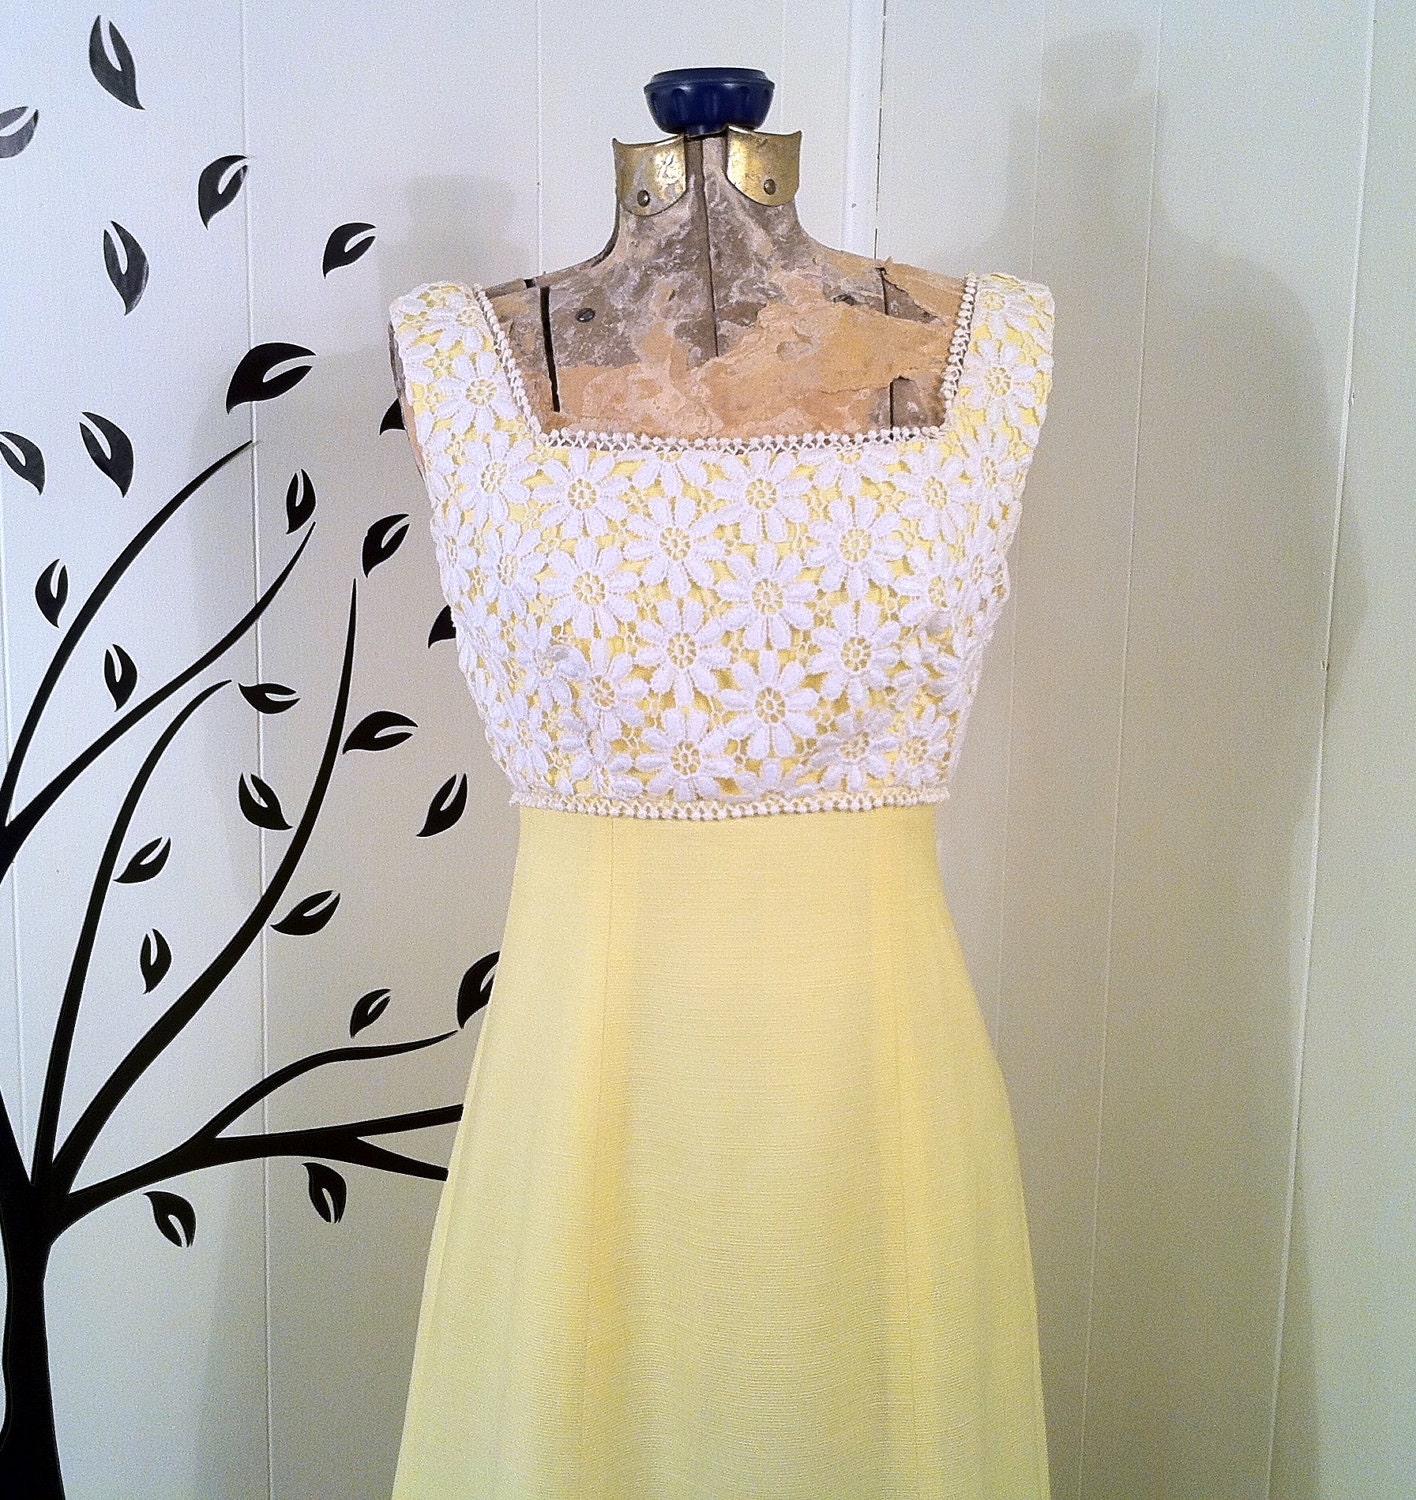 Vintage 1960s Yellow Cotton and Lace Gown with Attached Train, Bridal or Wedding Gown